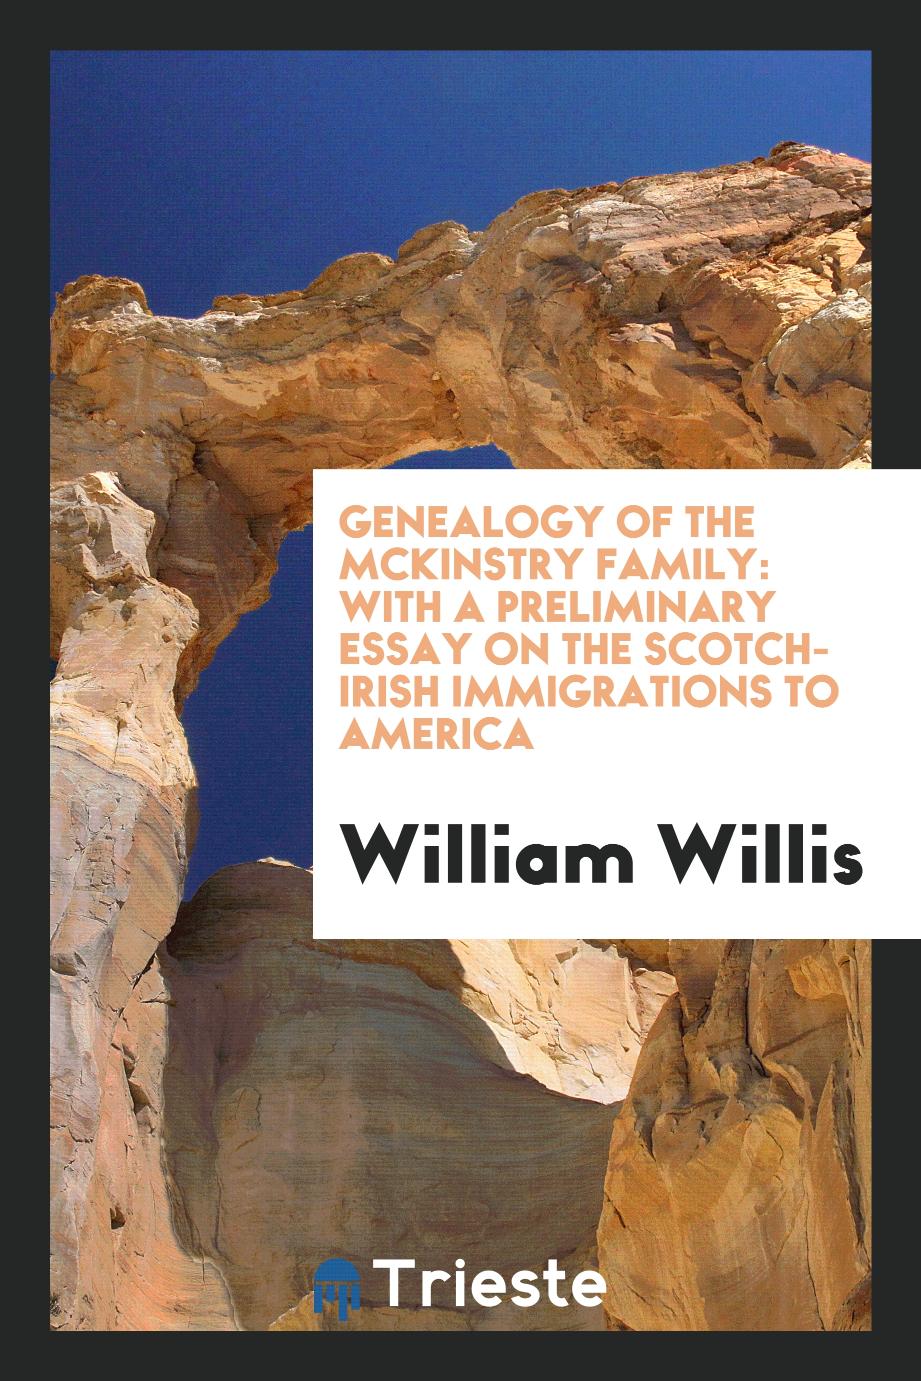 Genealogy of the Mckinstry Family: With a Preliminary Essay on the Scotch-Irish Immigrations to America